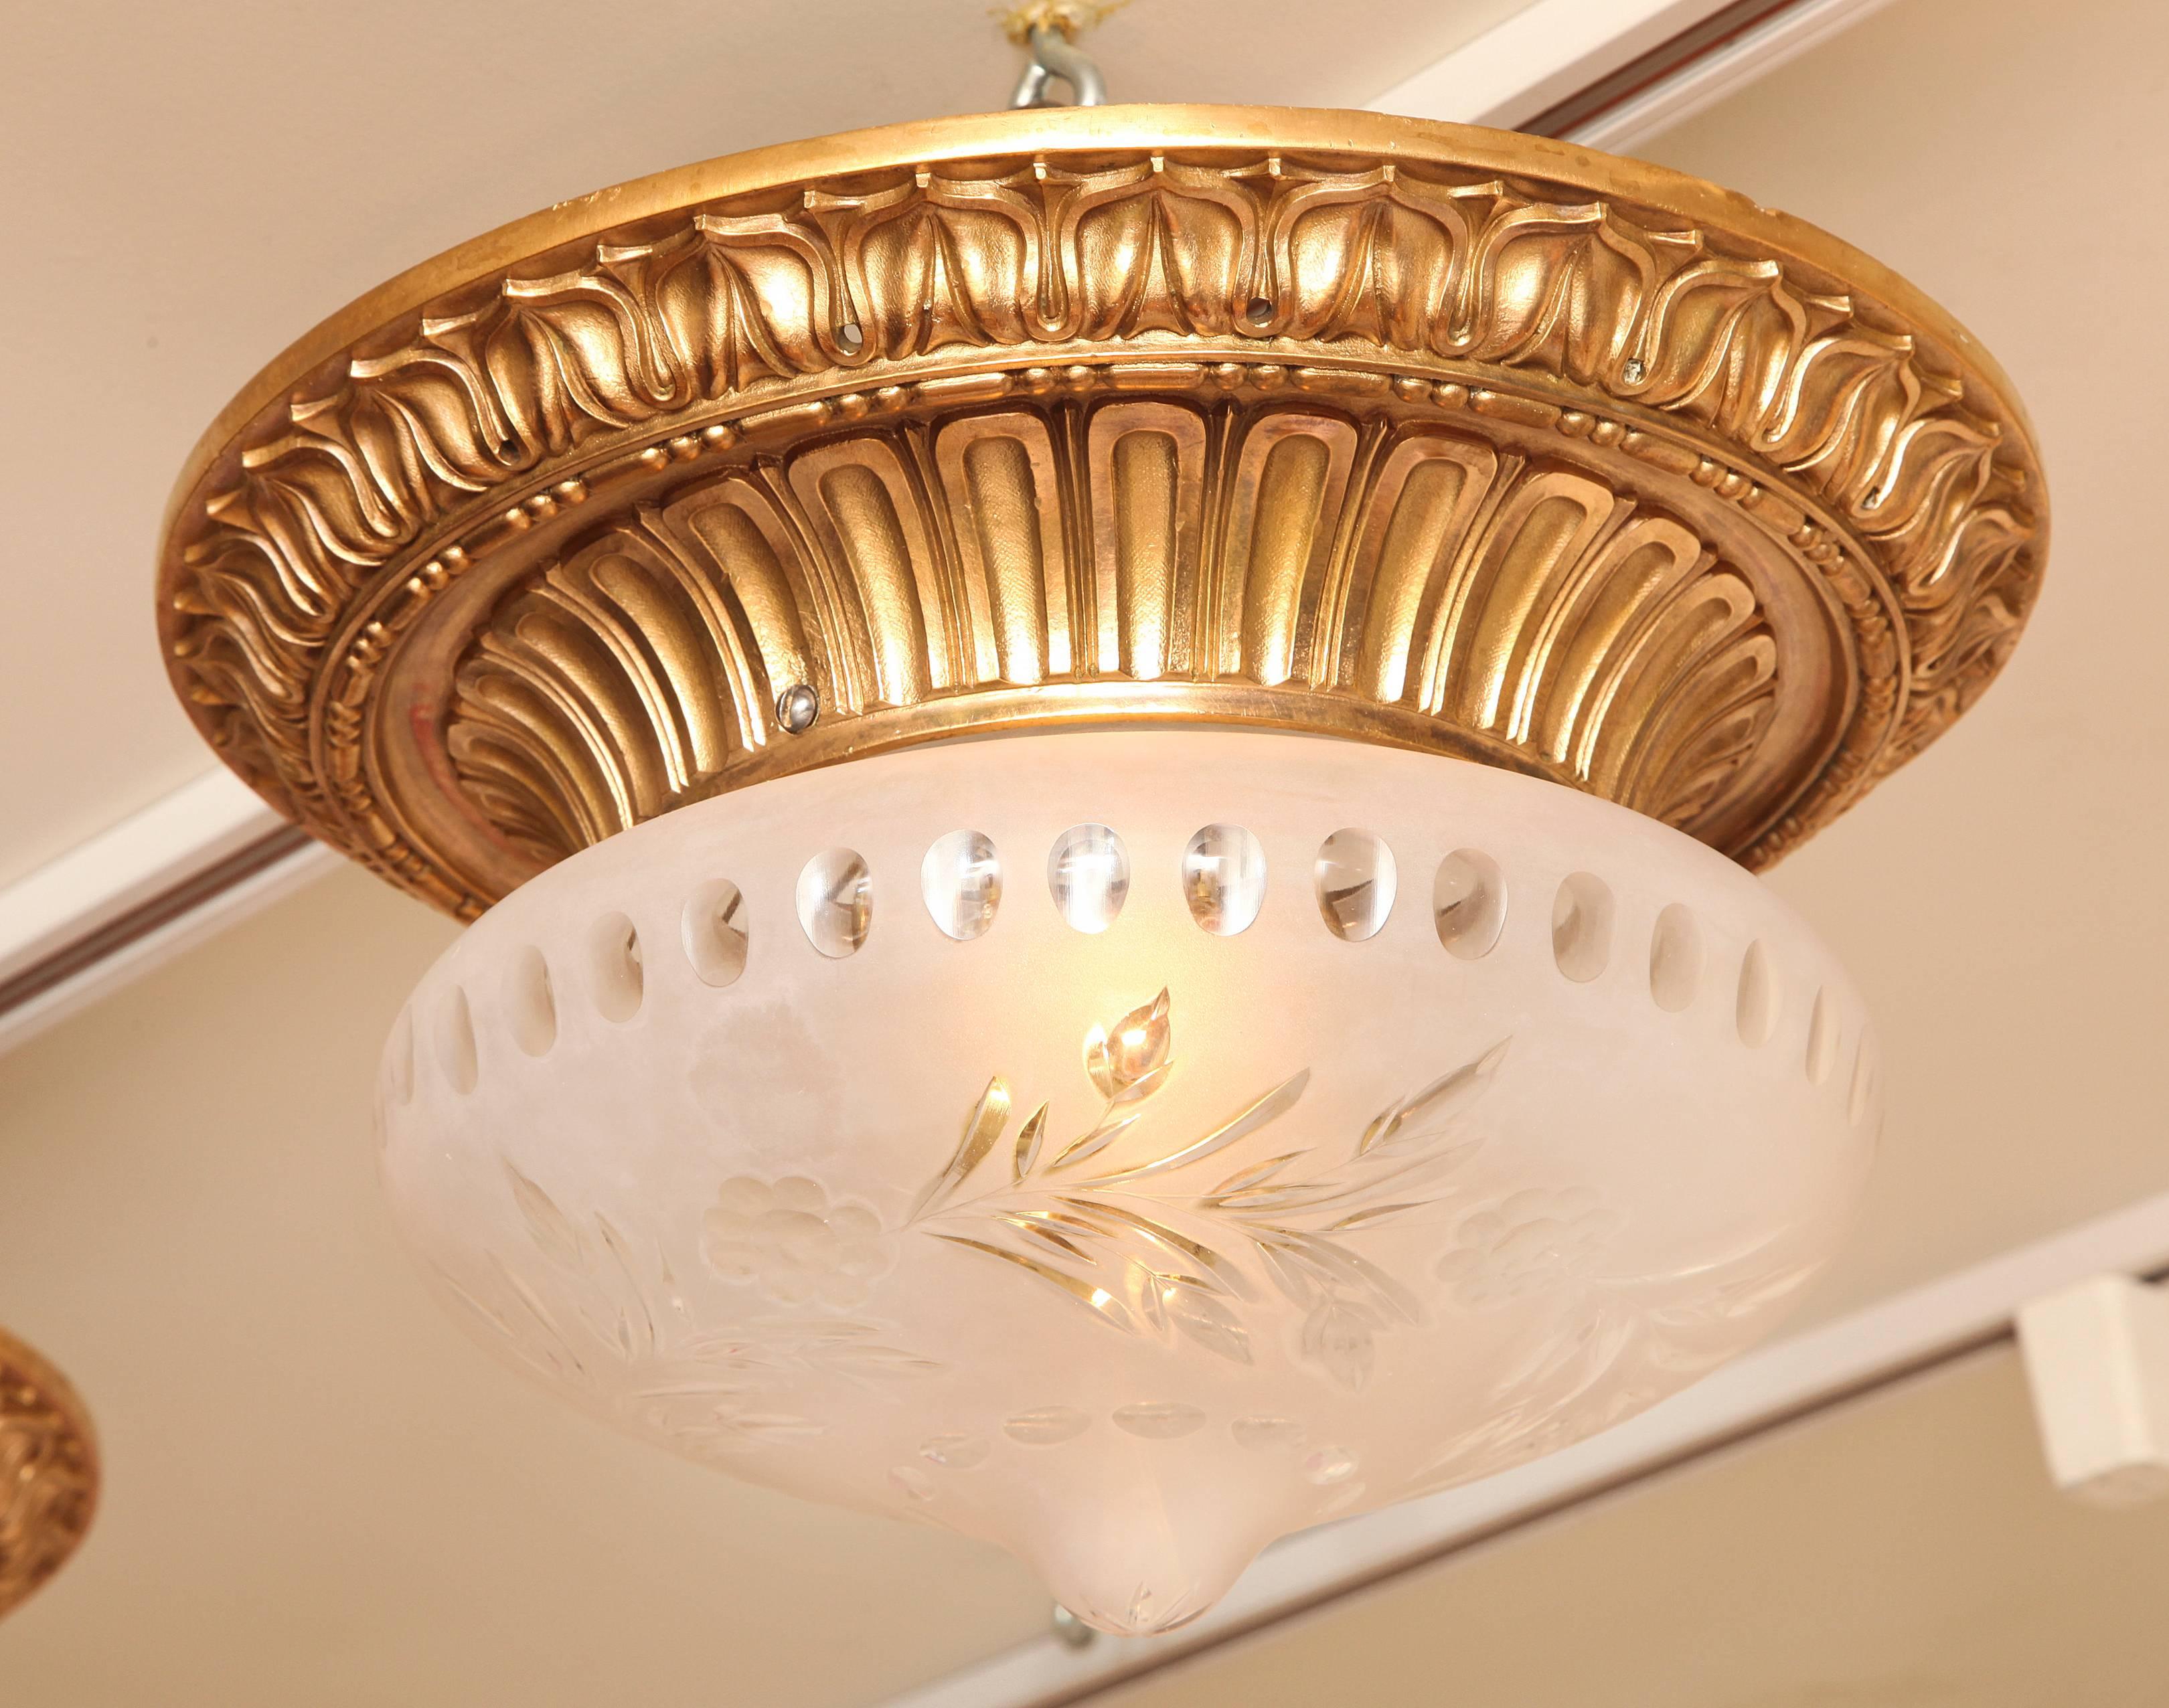 American bronze flush mounted fixture by maker Caldwell. The round frame with leaf tip border surrounding arch fluted inner rim securing dome shaped cut-glass shade. Floral, frosted glass domed shade with drop in center, concealing two Edison